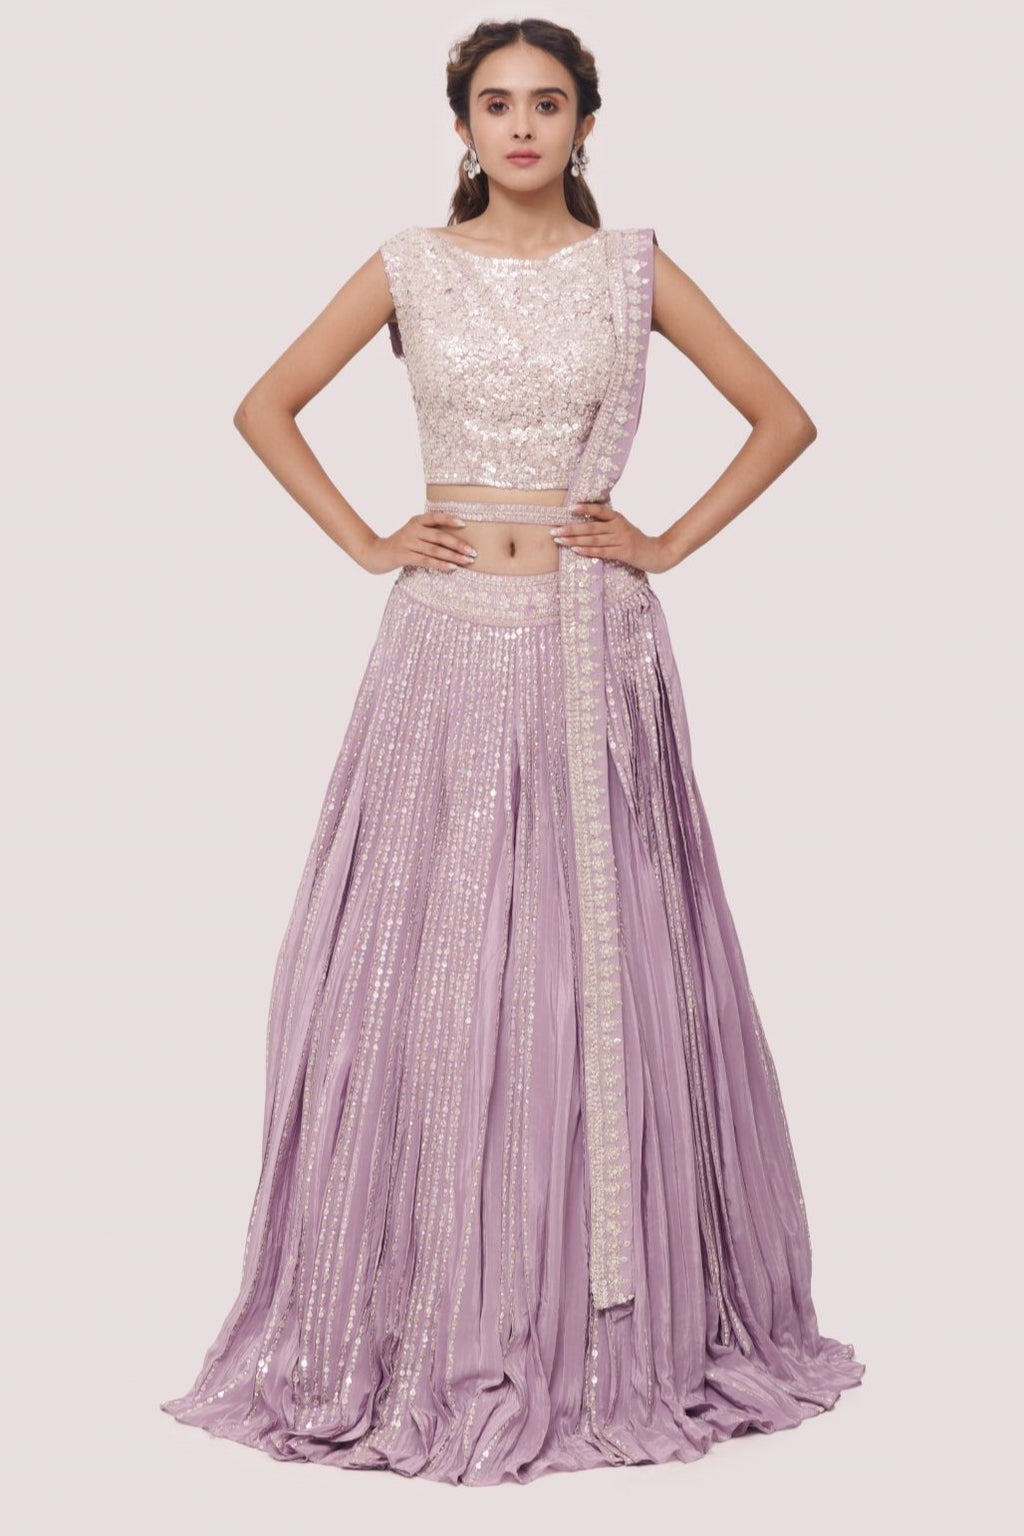 Shop the Look your best on wedding occasions in this lavender color lehenga with sequin and tikki work and a beautiful dupatta. Dazzle on weddings and special occasions with exquisite Indian designer dresses, sharara suits, Anarkali suits, bridal lehengas, and sharara suits from Pure Elegance Indian clothing store in the USA. Shop online from Pure Elegance.